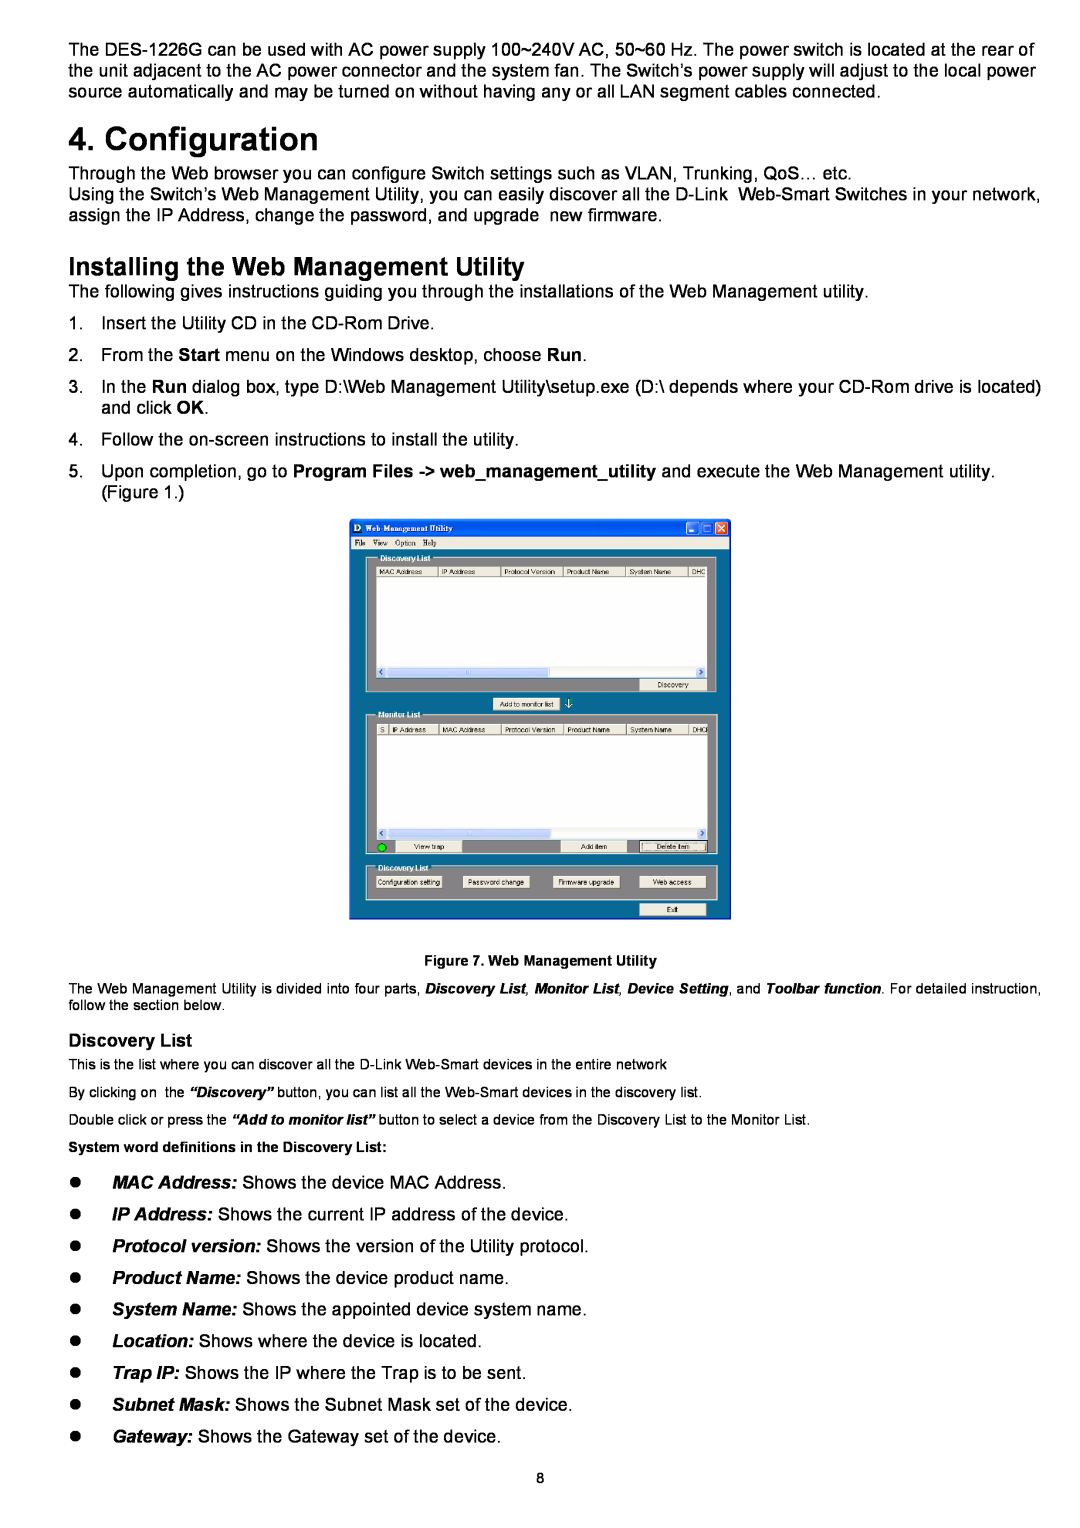 D-Link DES-1226G manual Configuration, Installing the Web Management Utility, Discovery List 